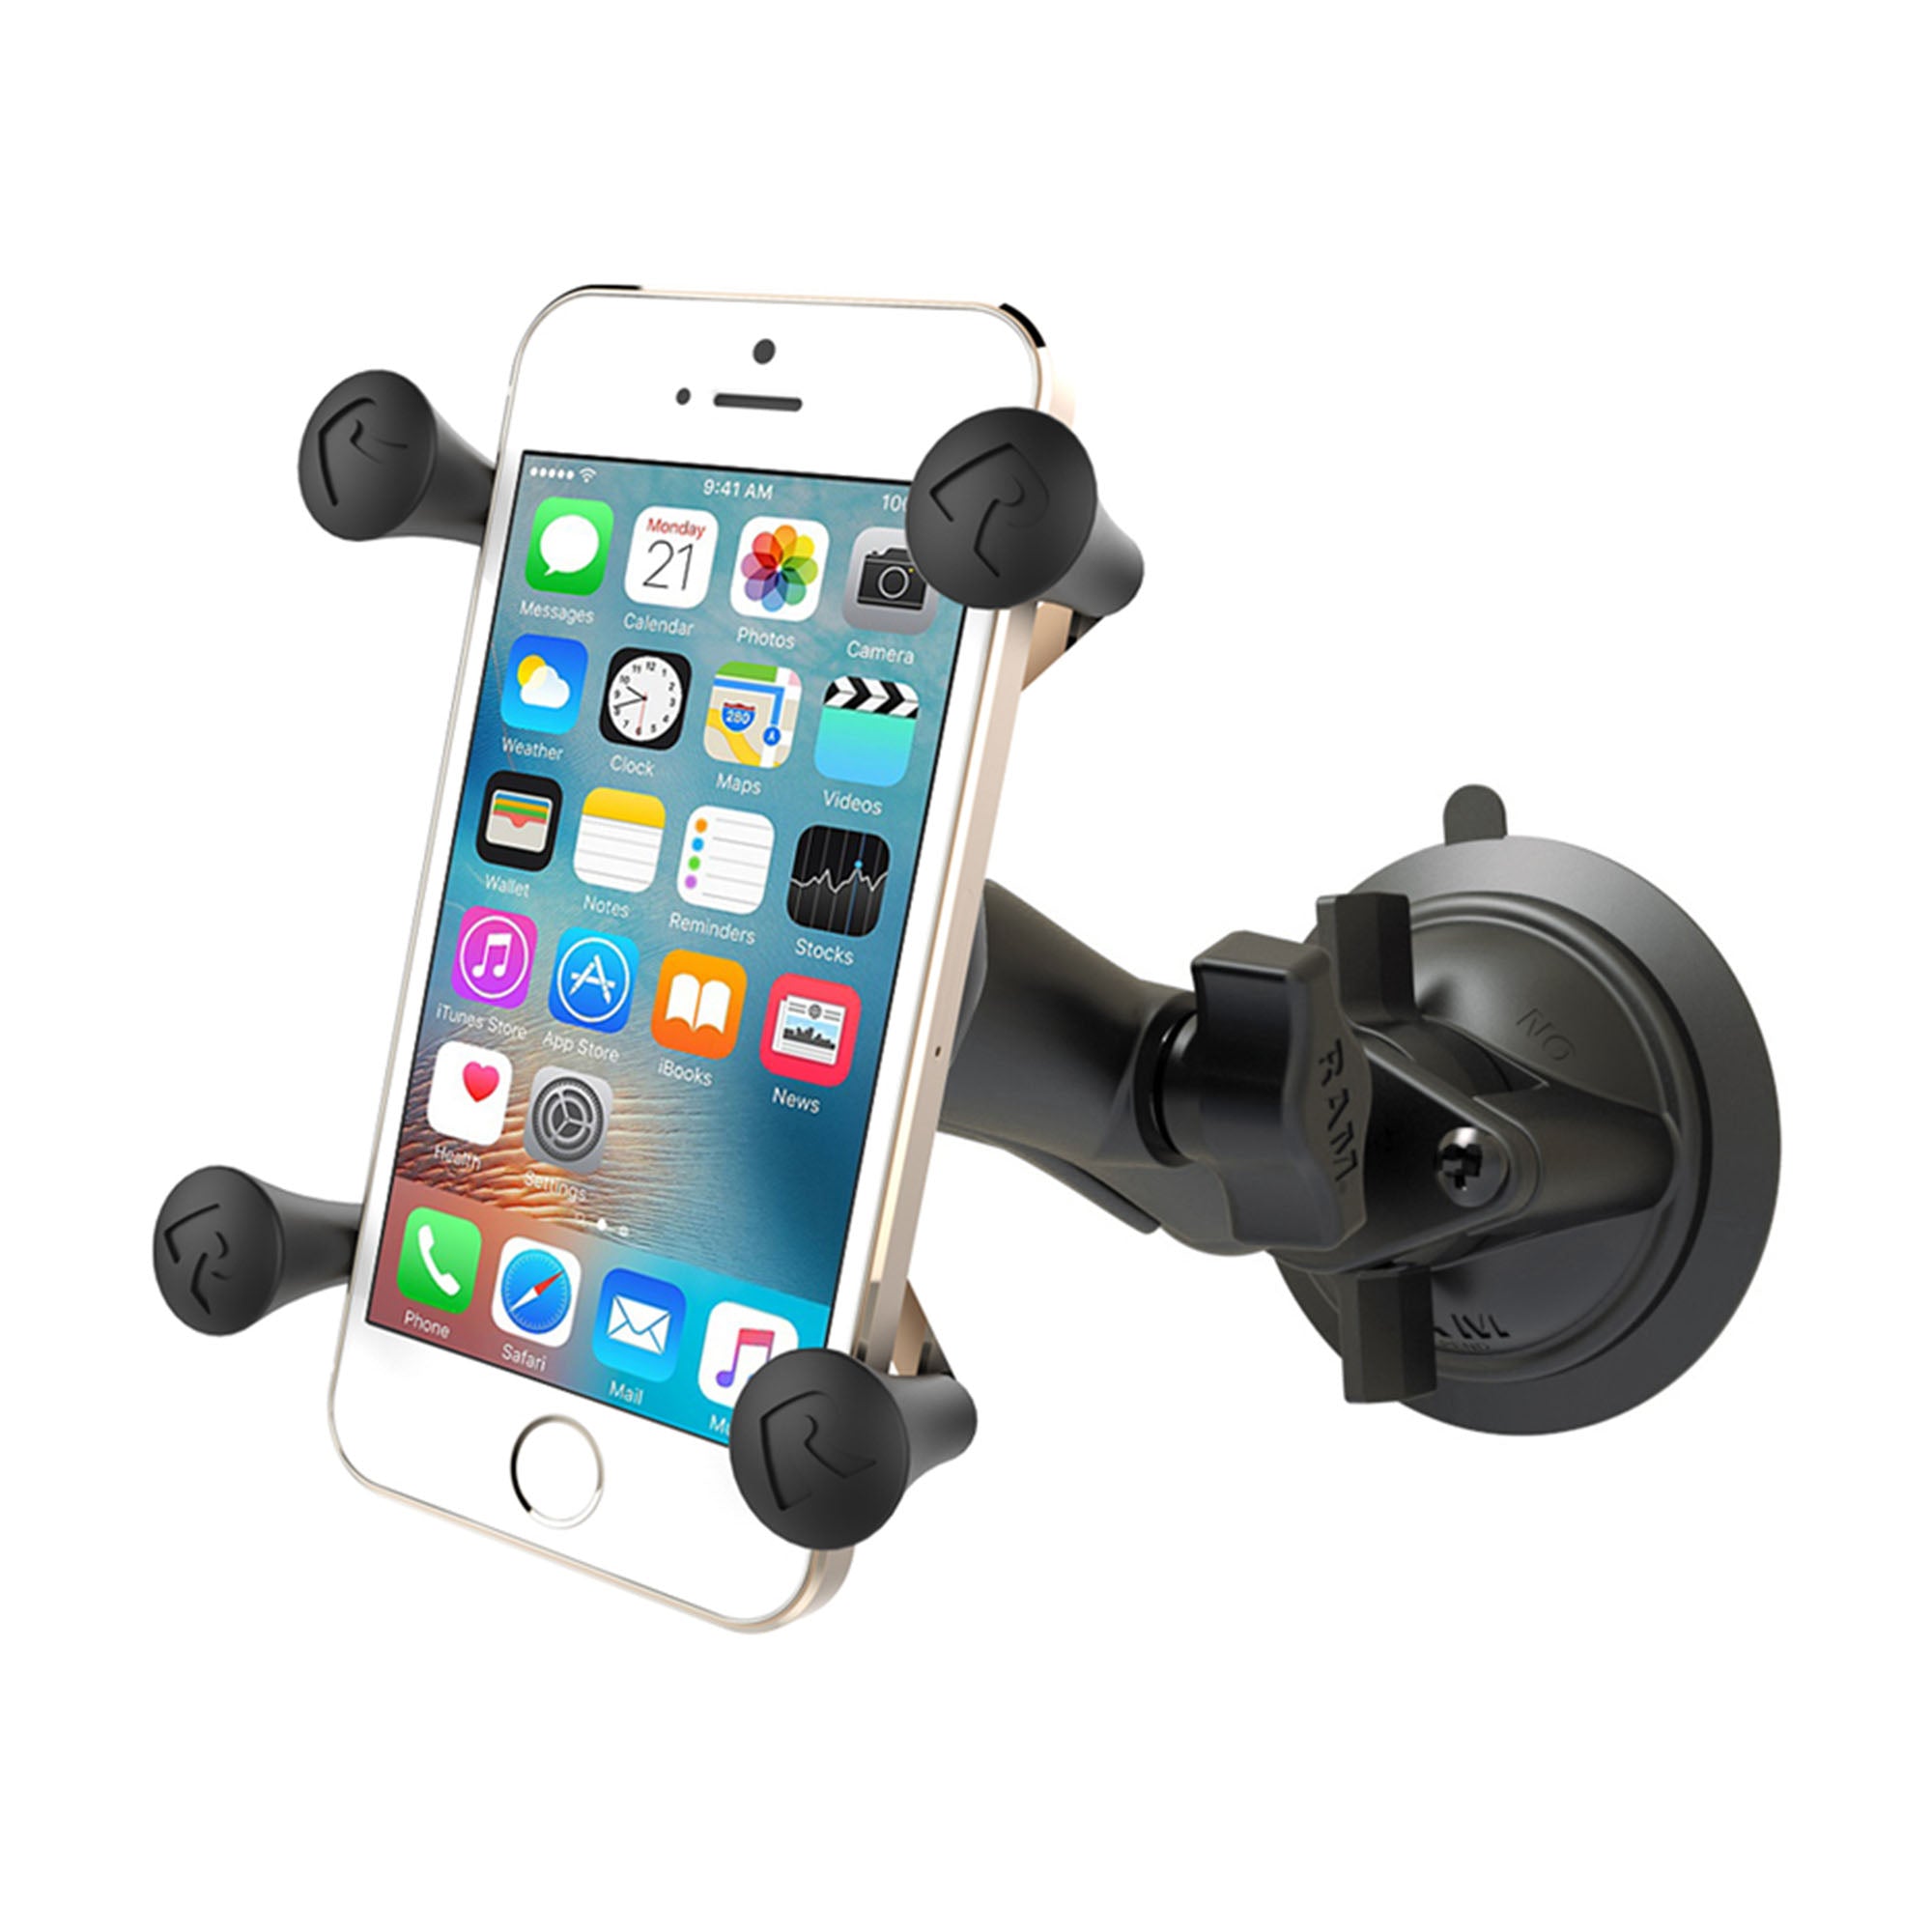 RAM Black X-Grip with Twist Lock Suction Cup Base Rugged Vehicle Mount